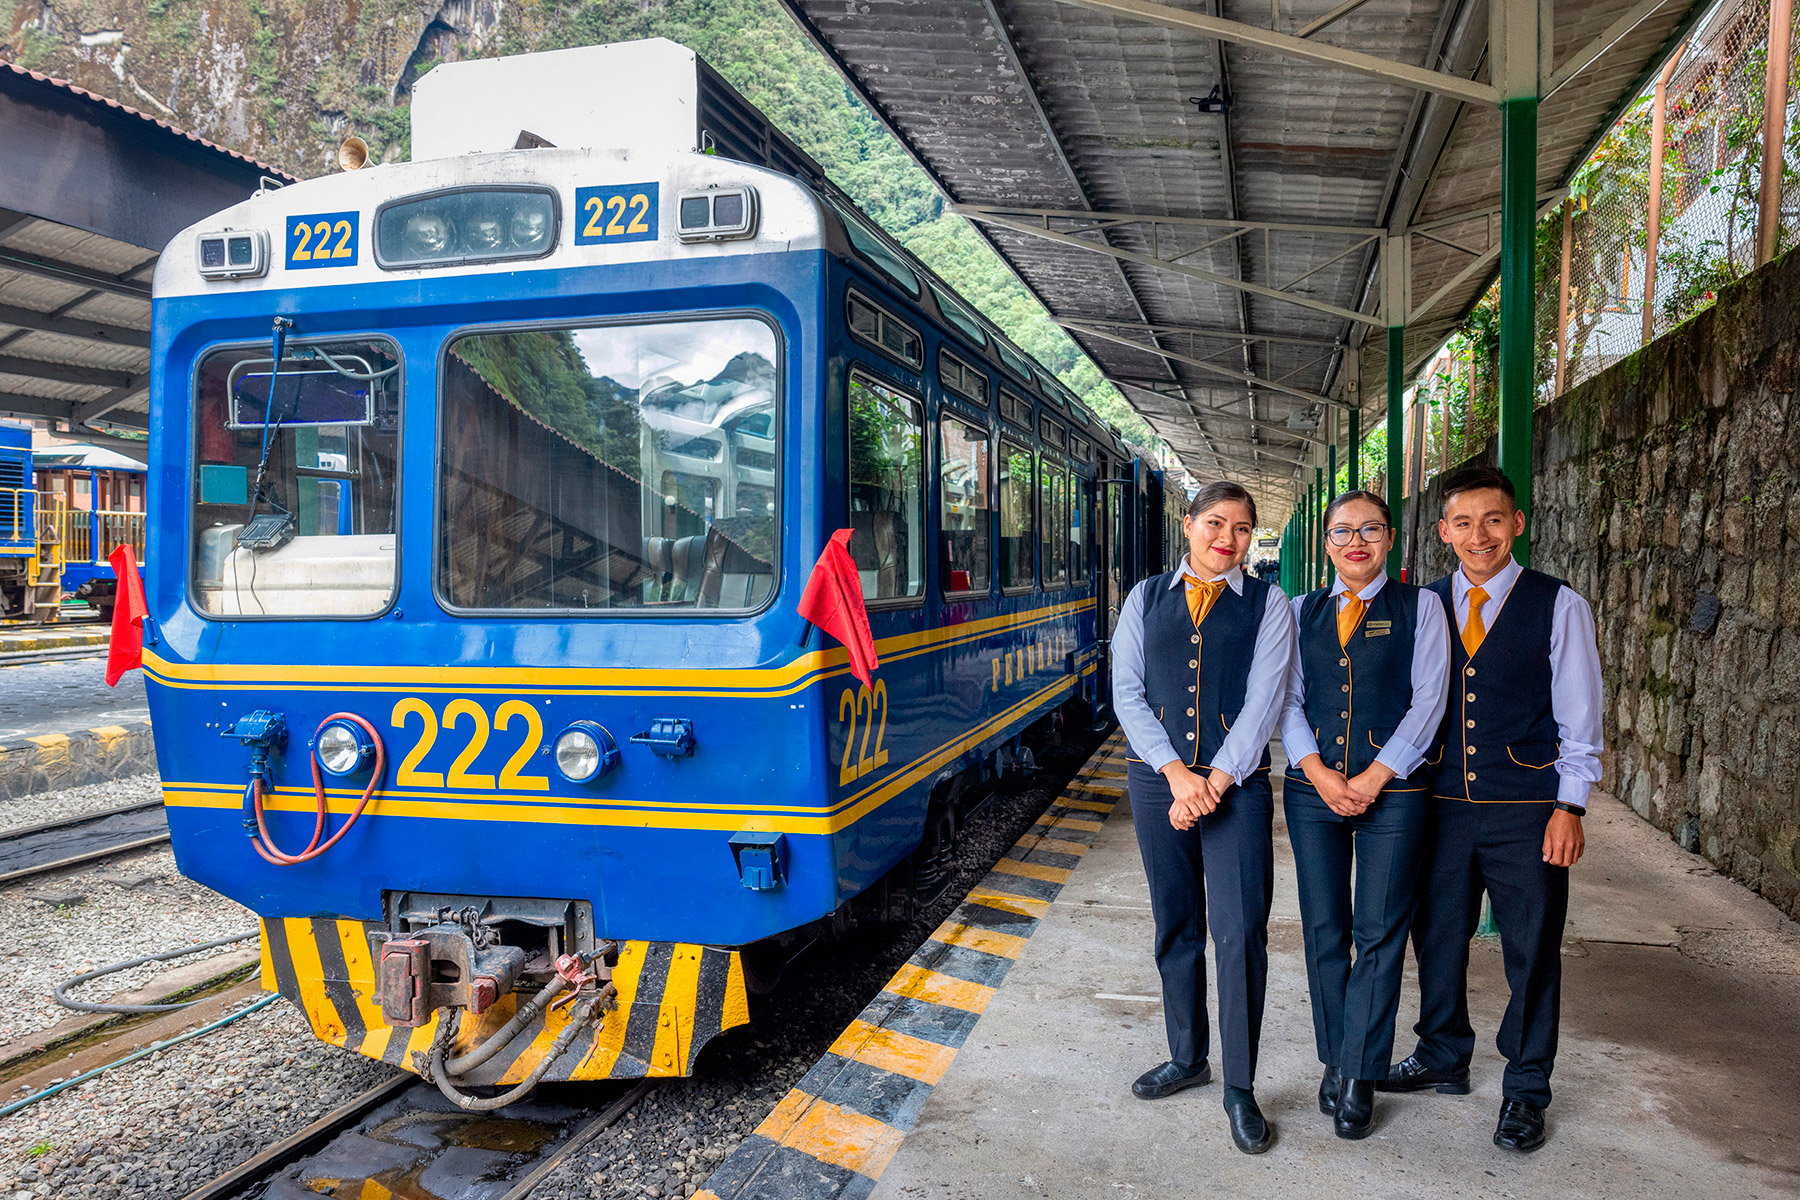 The train attendants on my morning ride to Machu Picchu Pueblo station